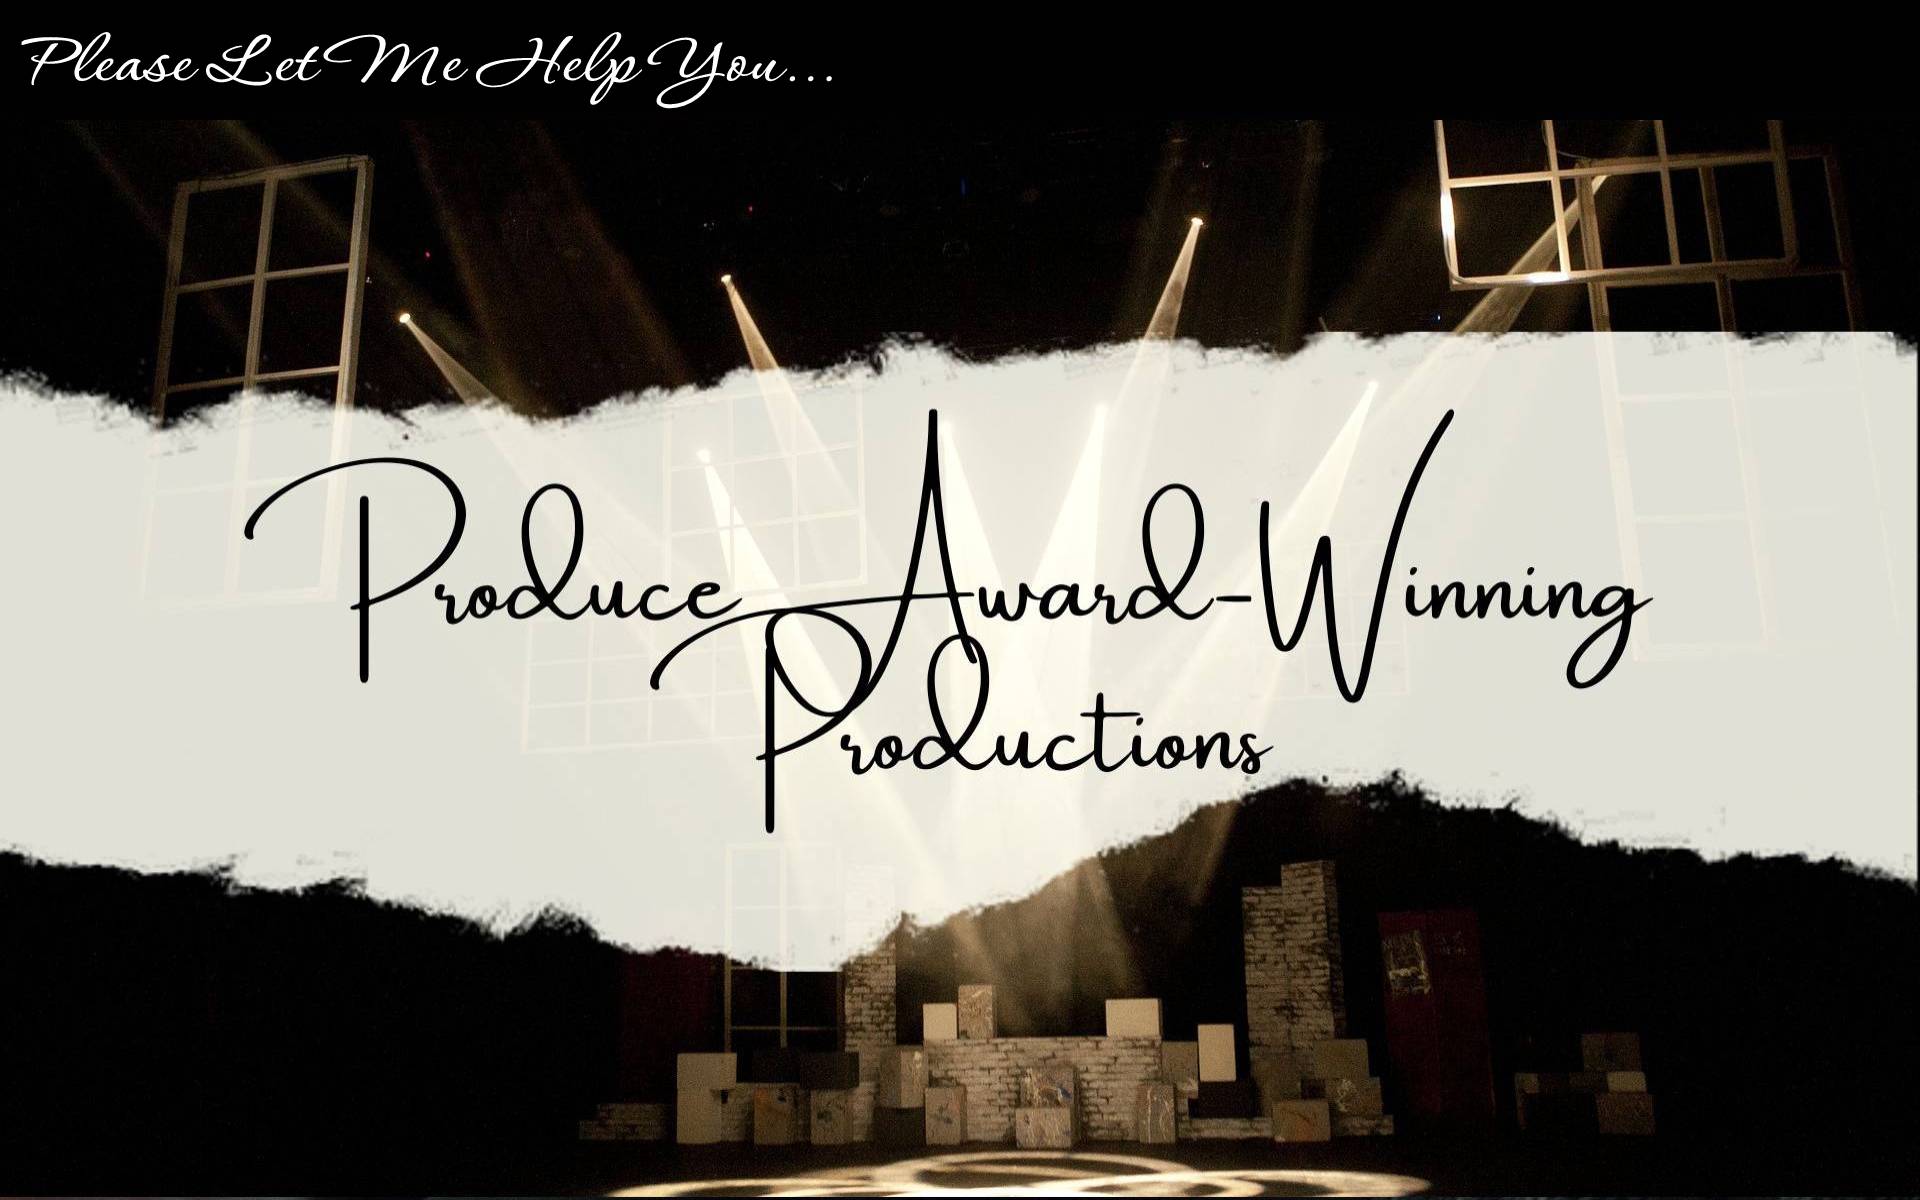 Picture of Produce Award-Winning Productions